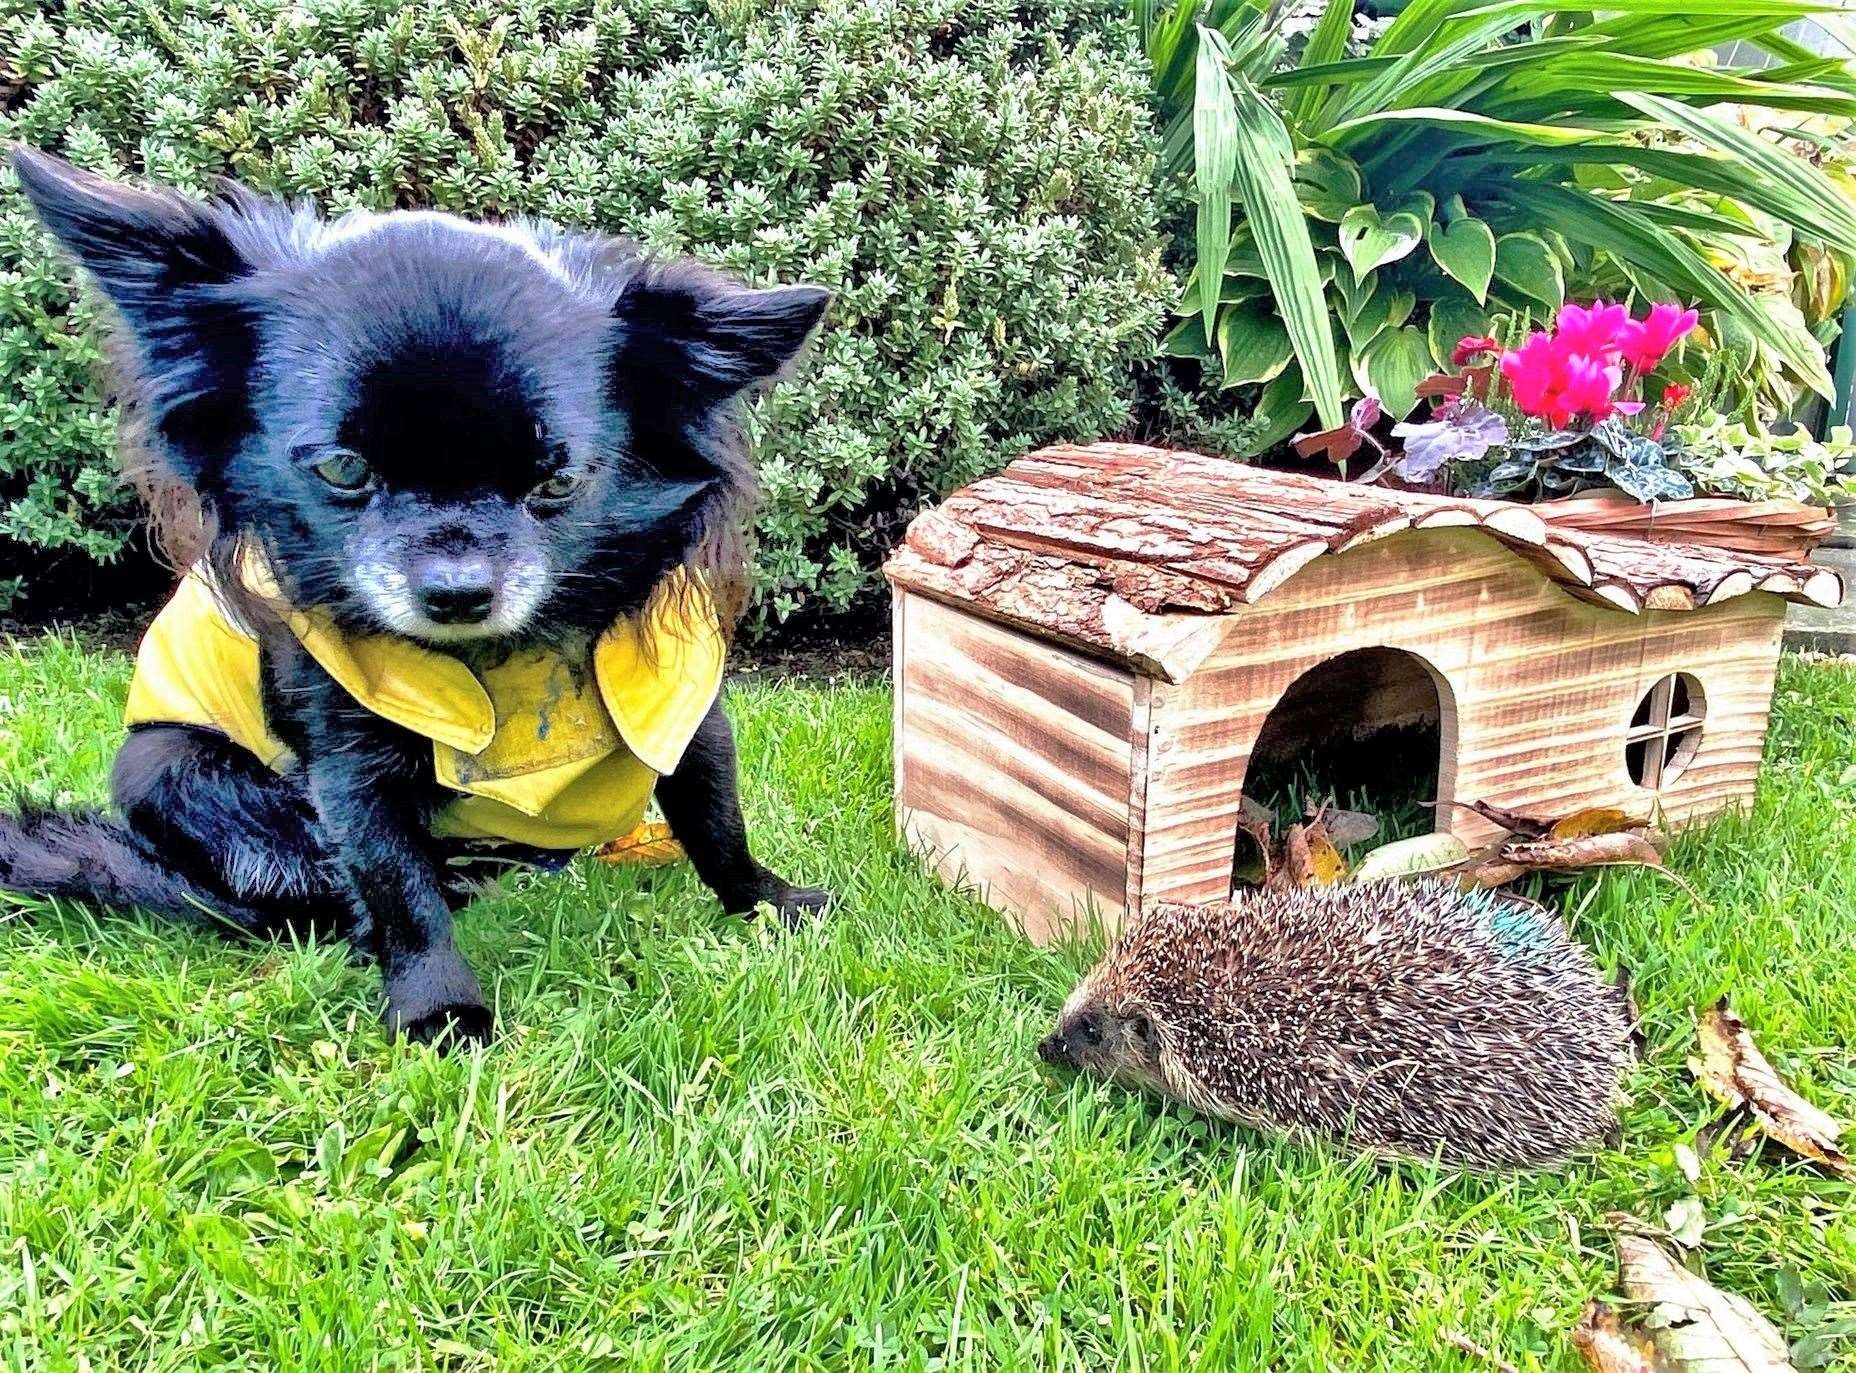 Natalie's faithful companion Louis Vuitton the Chihuahua along with Puck and his special hedgehog hibernation house.